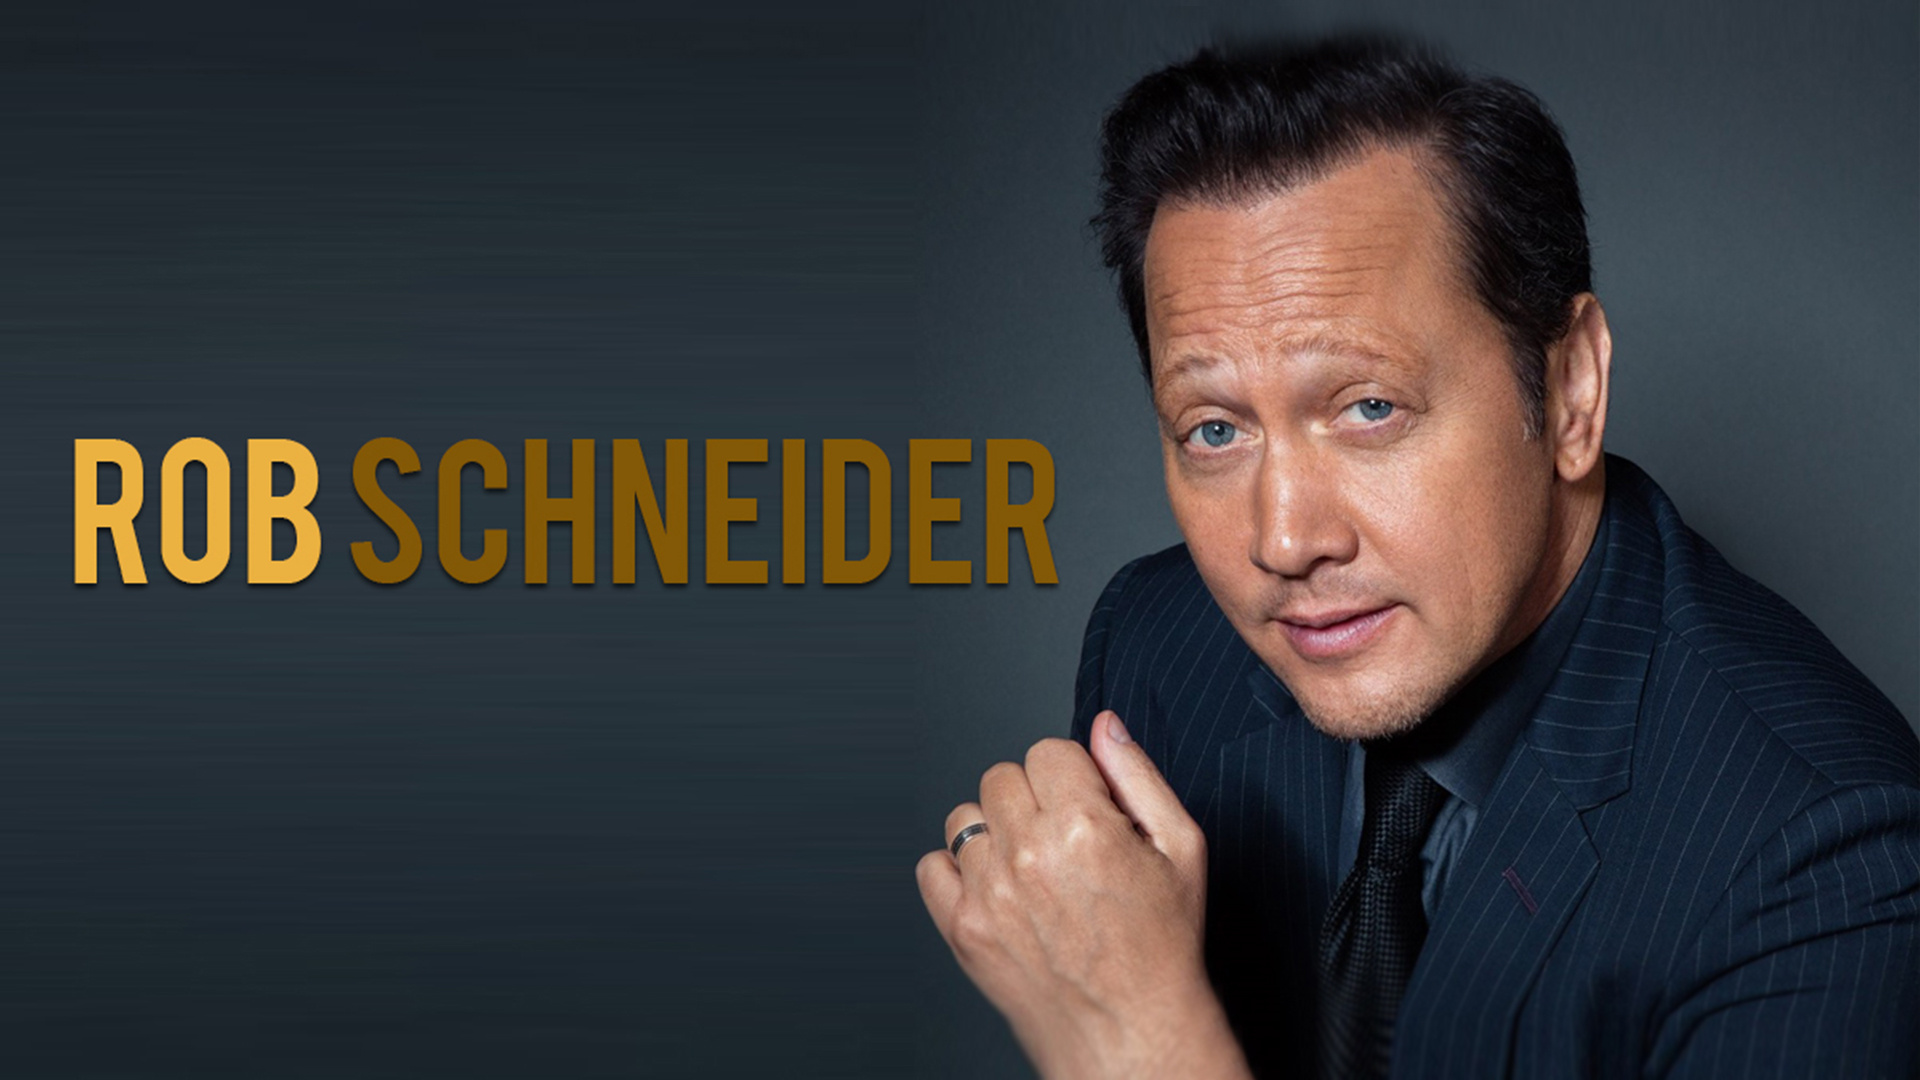 Rob Schneider, The River theater, Comedy performance, Live entertainment, 1920x1080 Full HD Desktop